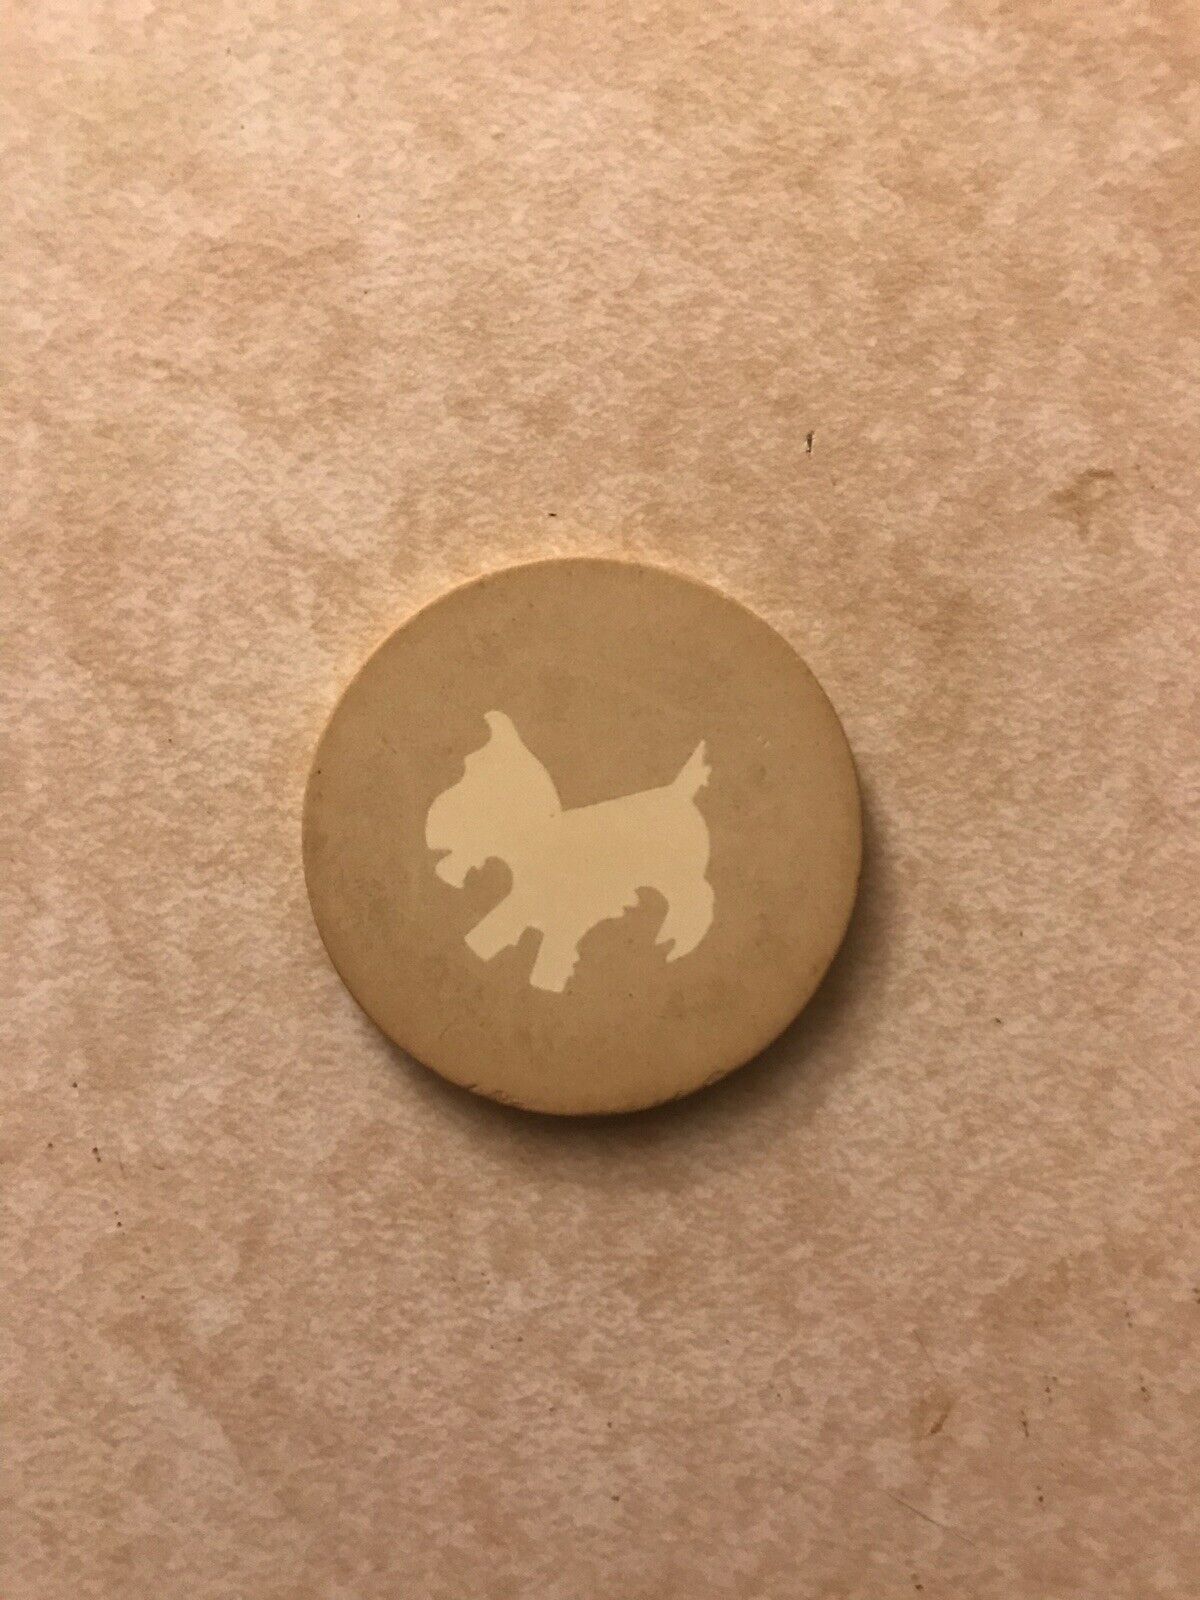 White Scotty Dog Early 1900s Clay Poker Chip Vintage Rare